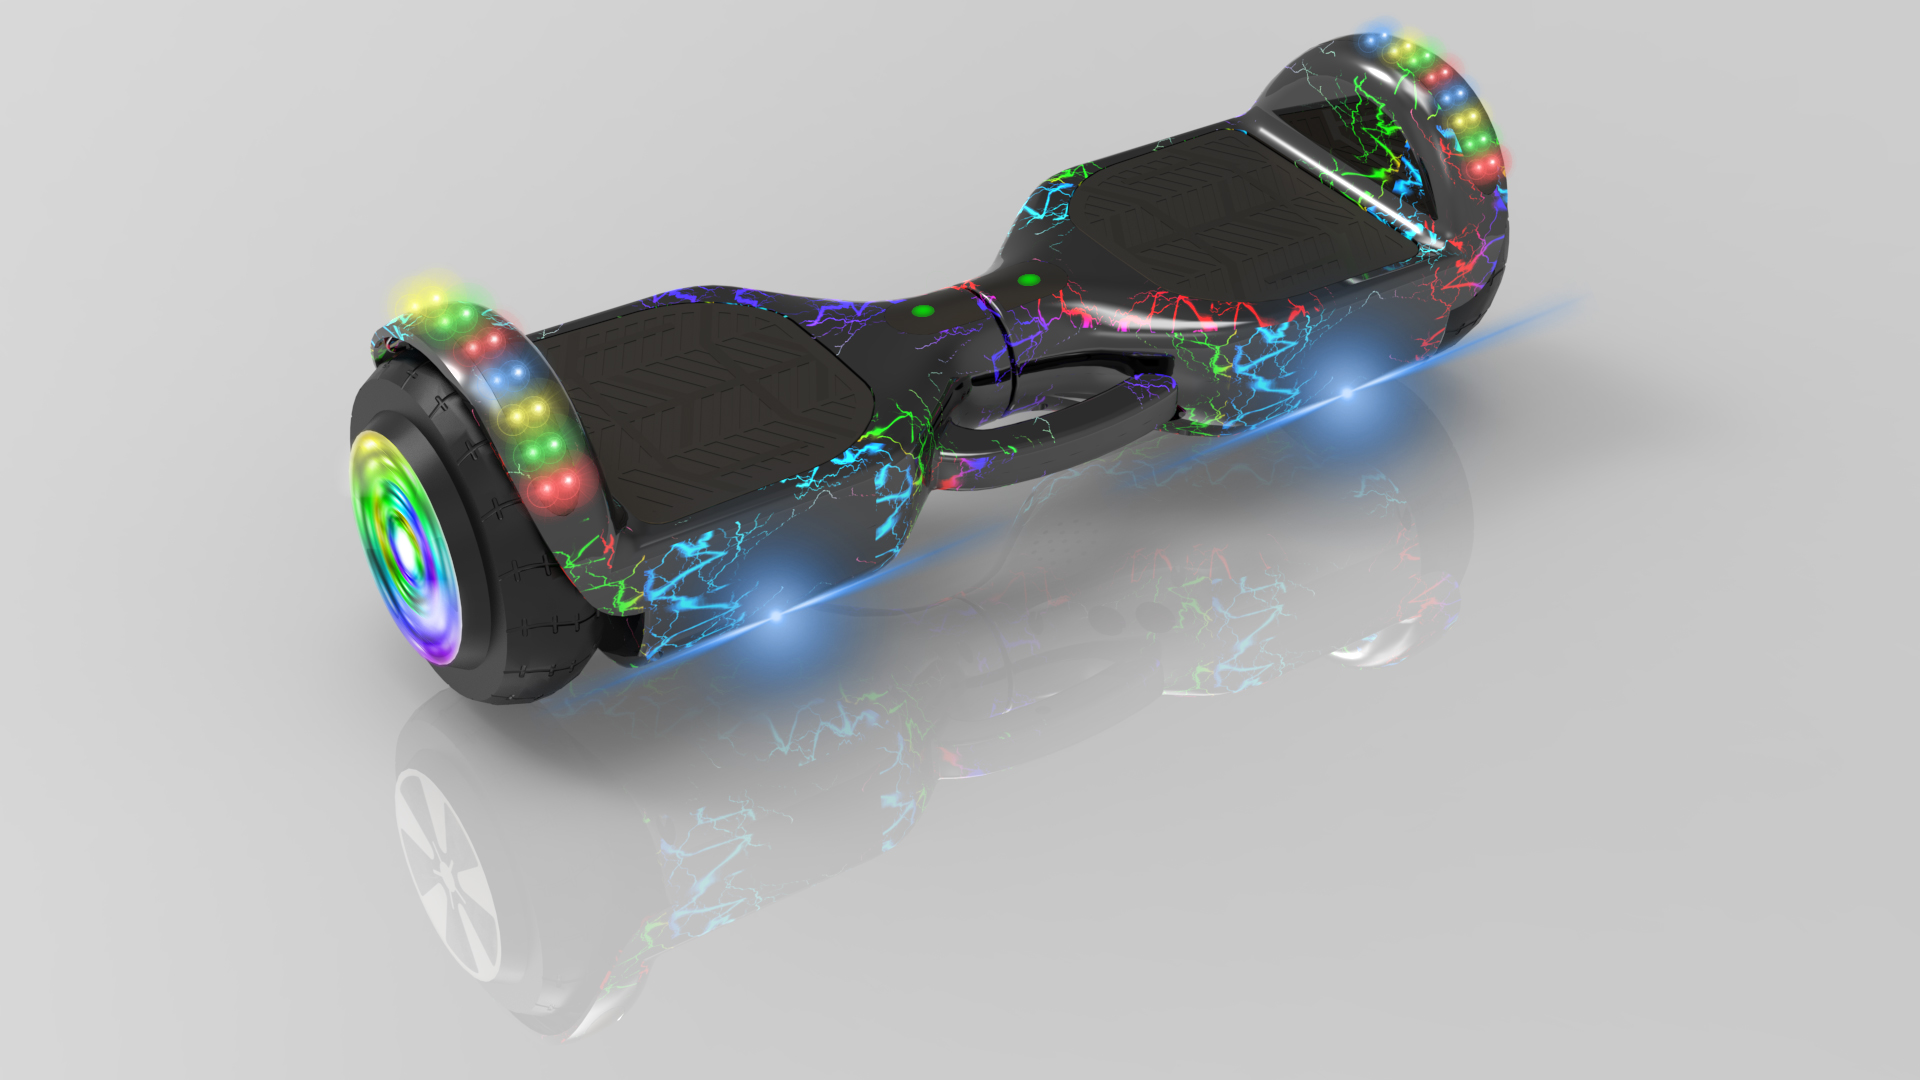 How long do hoverboards take to fully charge?